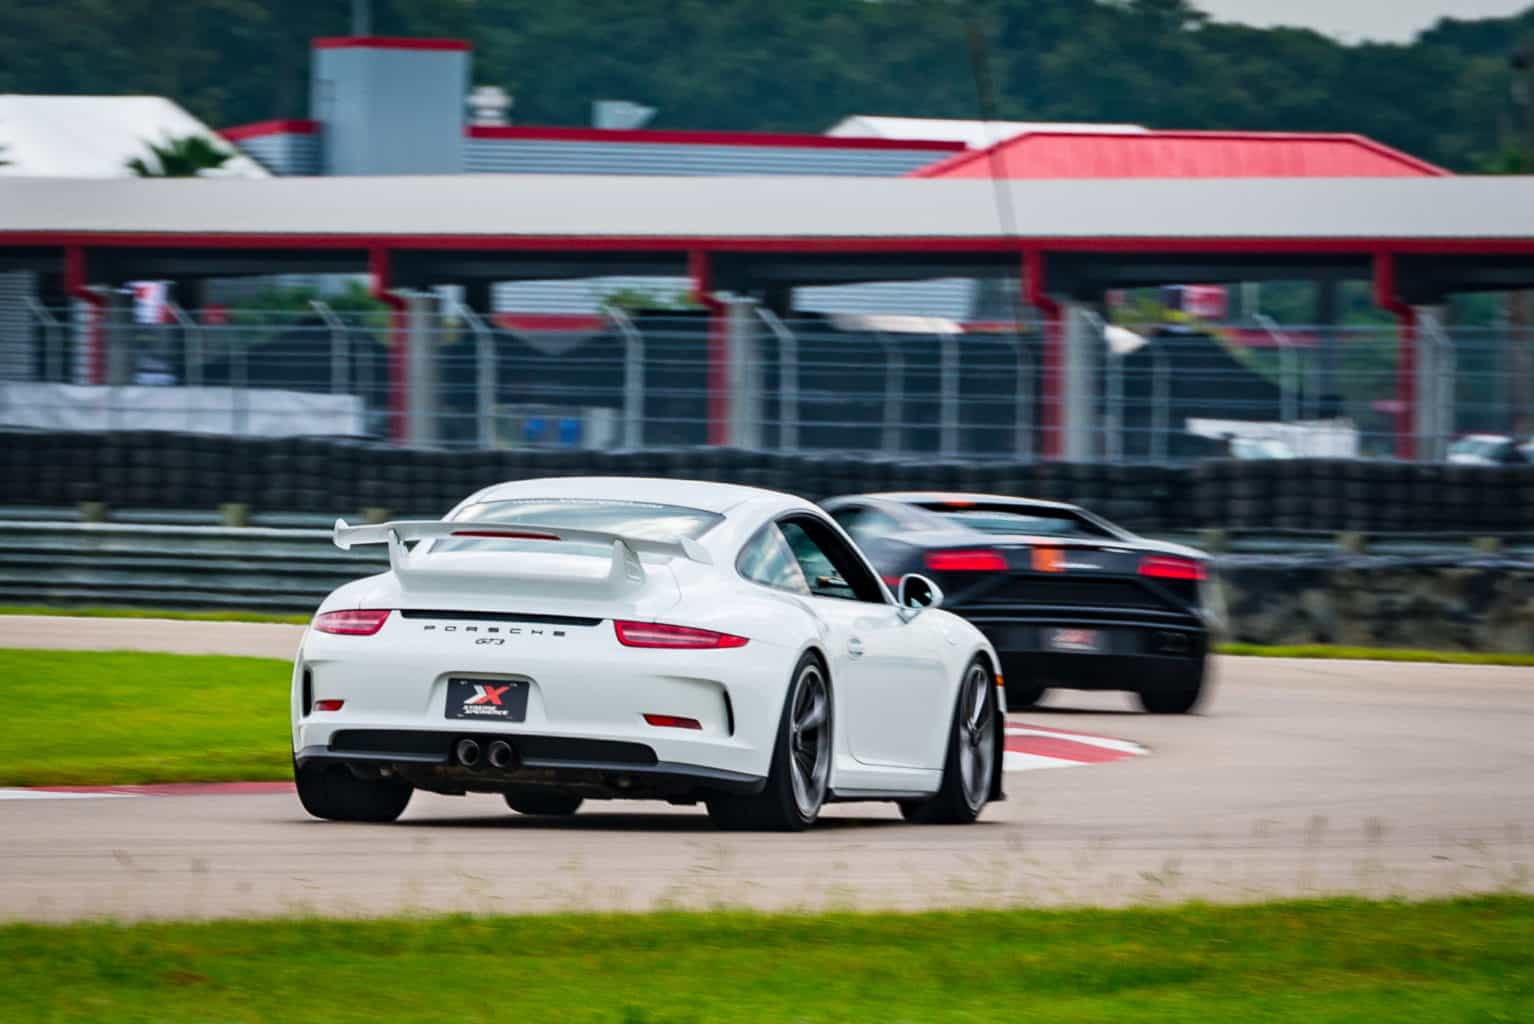 image of xtreme xperience porsche gt3 and lamborghini lp 560-4 at NOLA motorsports park my life at speed